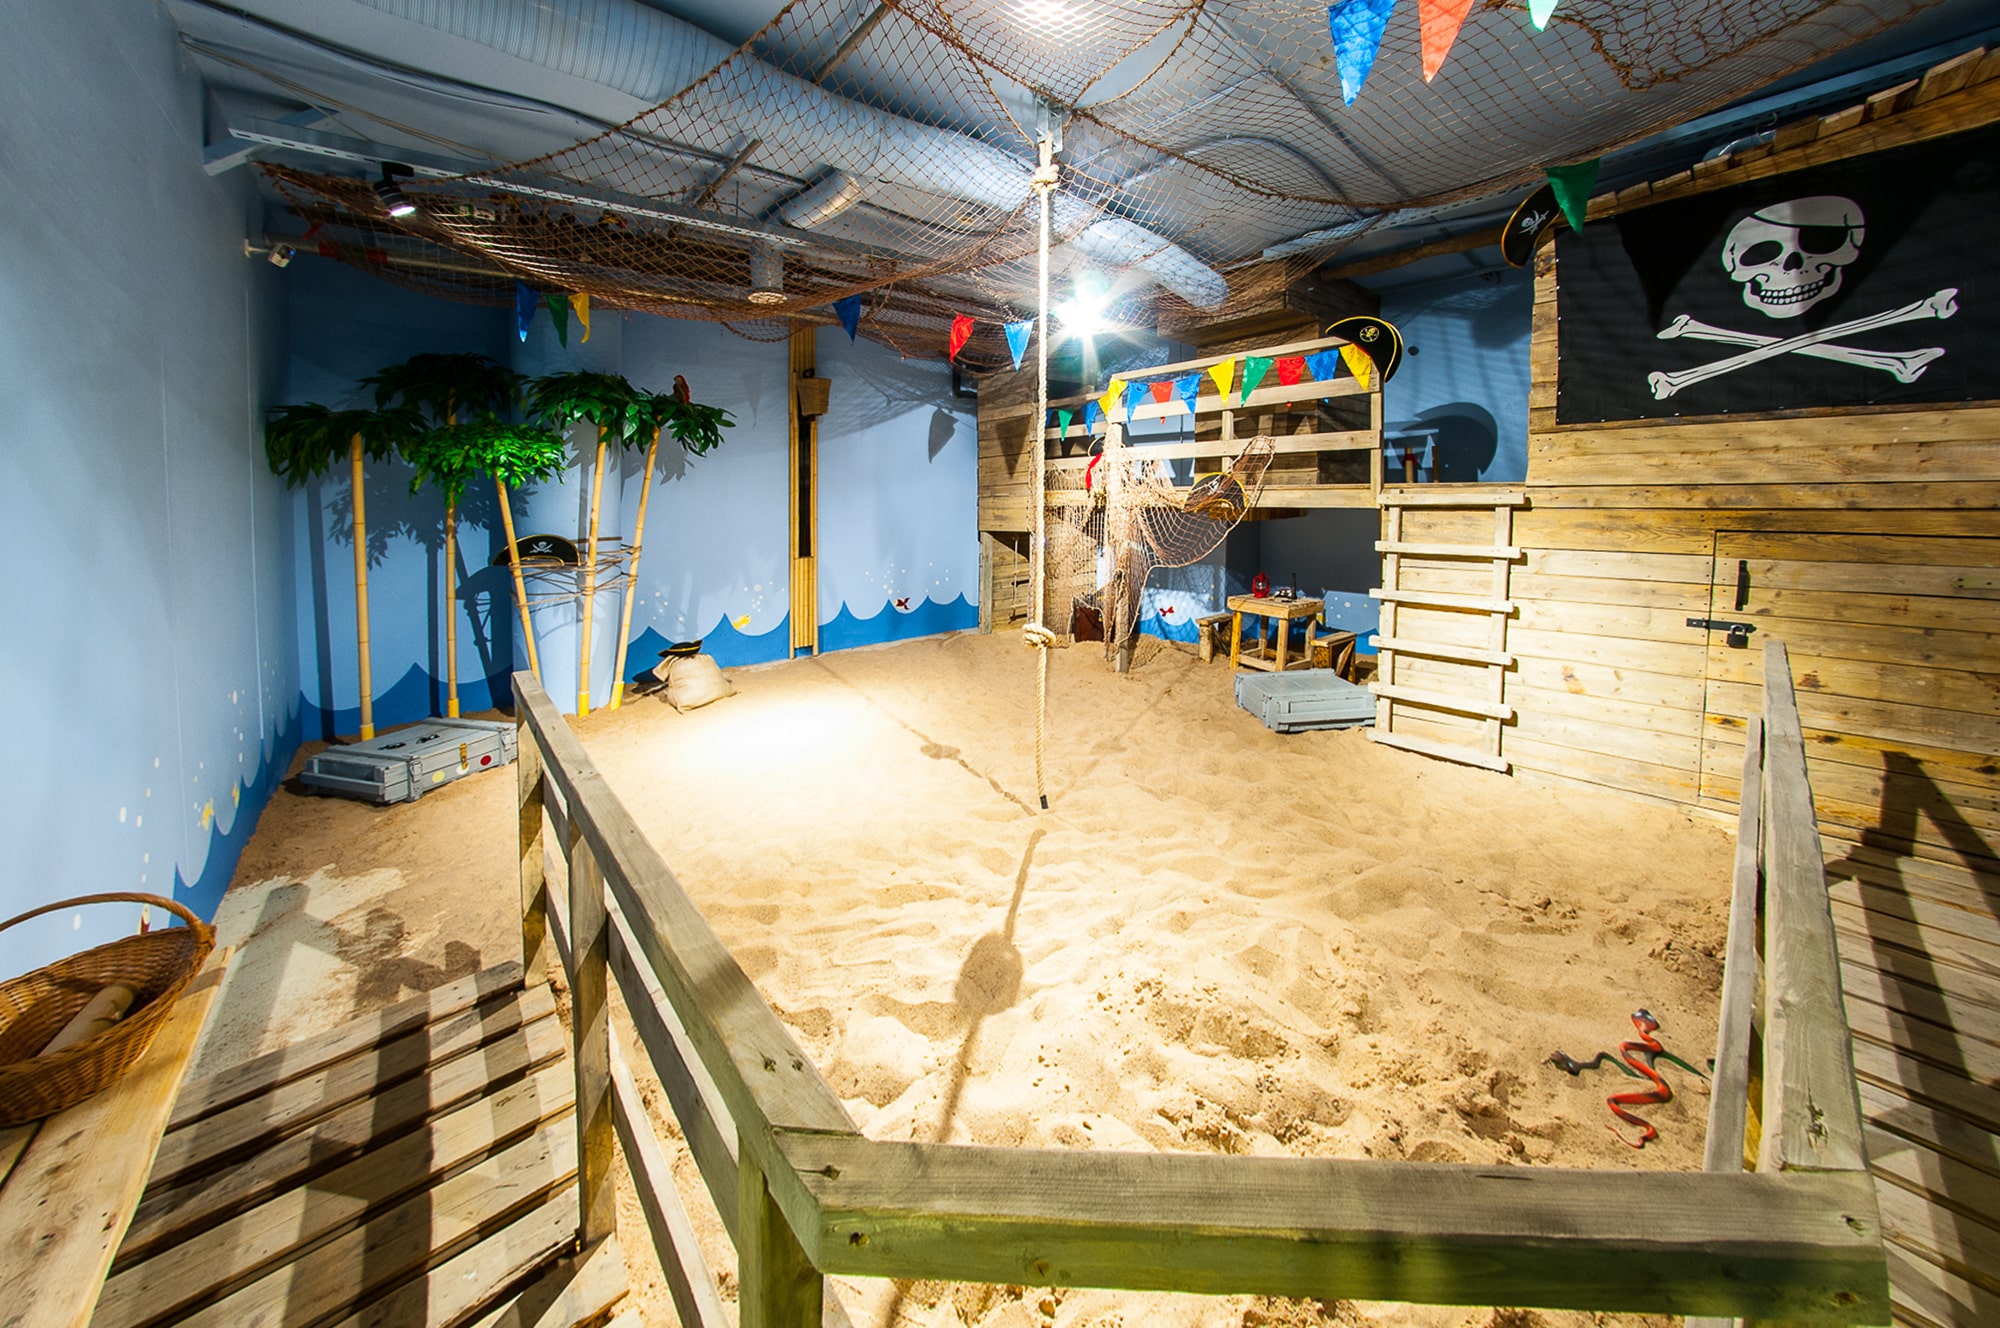 A pirate-themed room with a sand pit and a rope swing, perfect for an adventurous escape room experience for kids